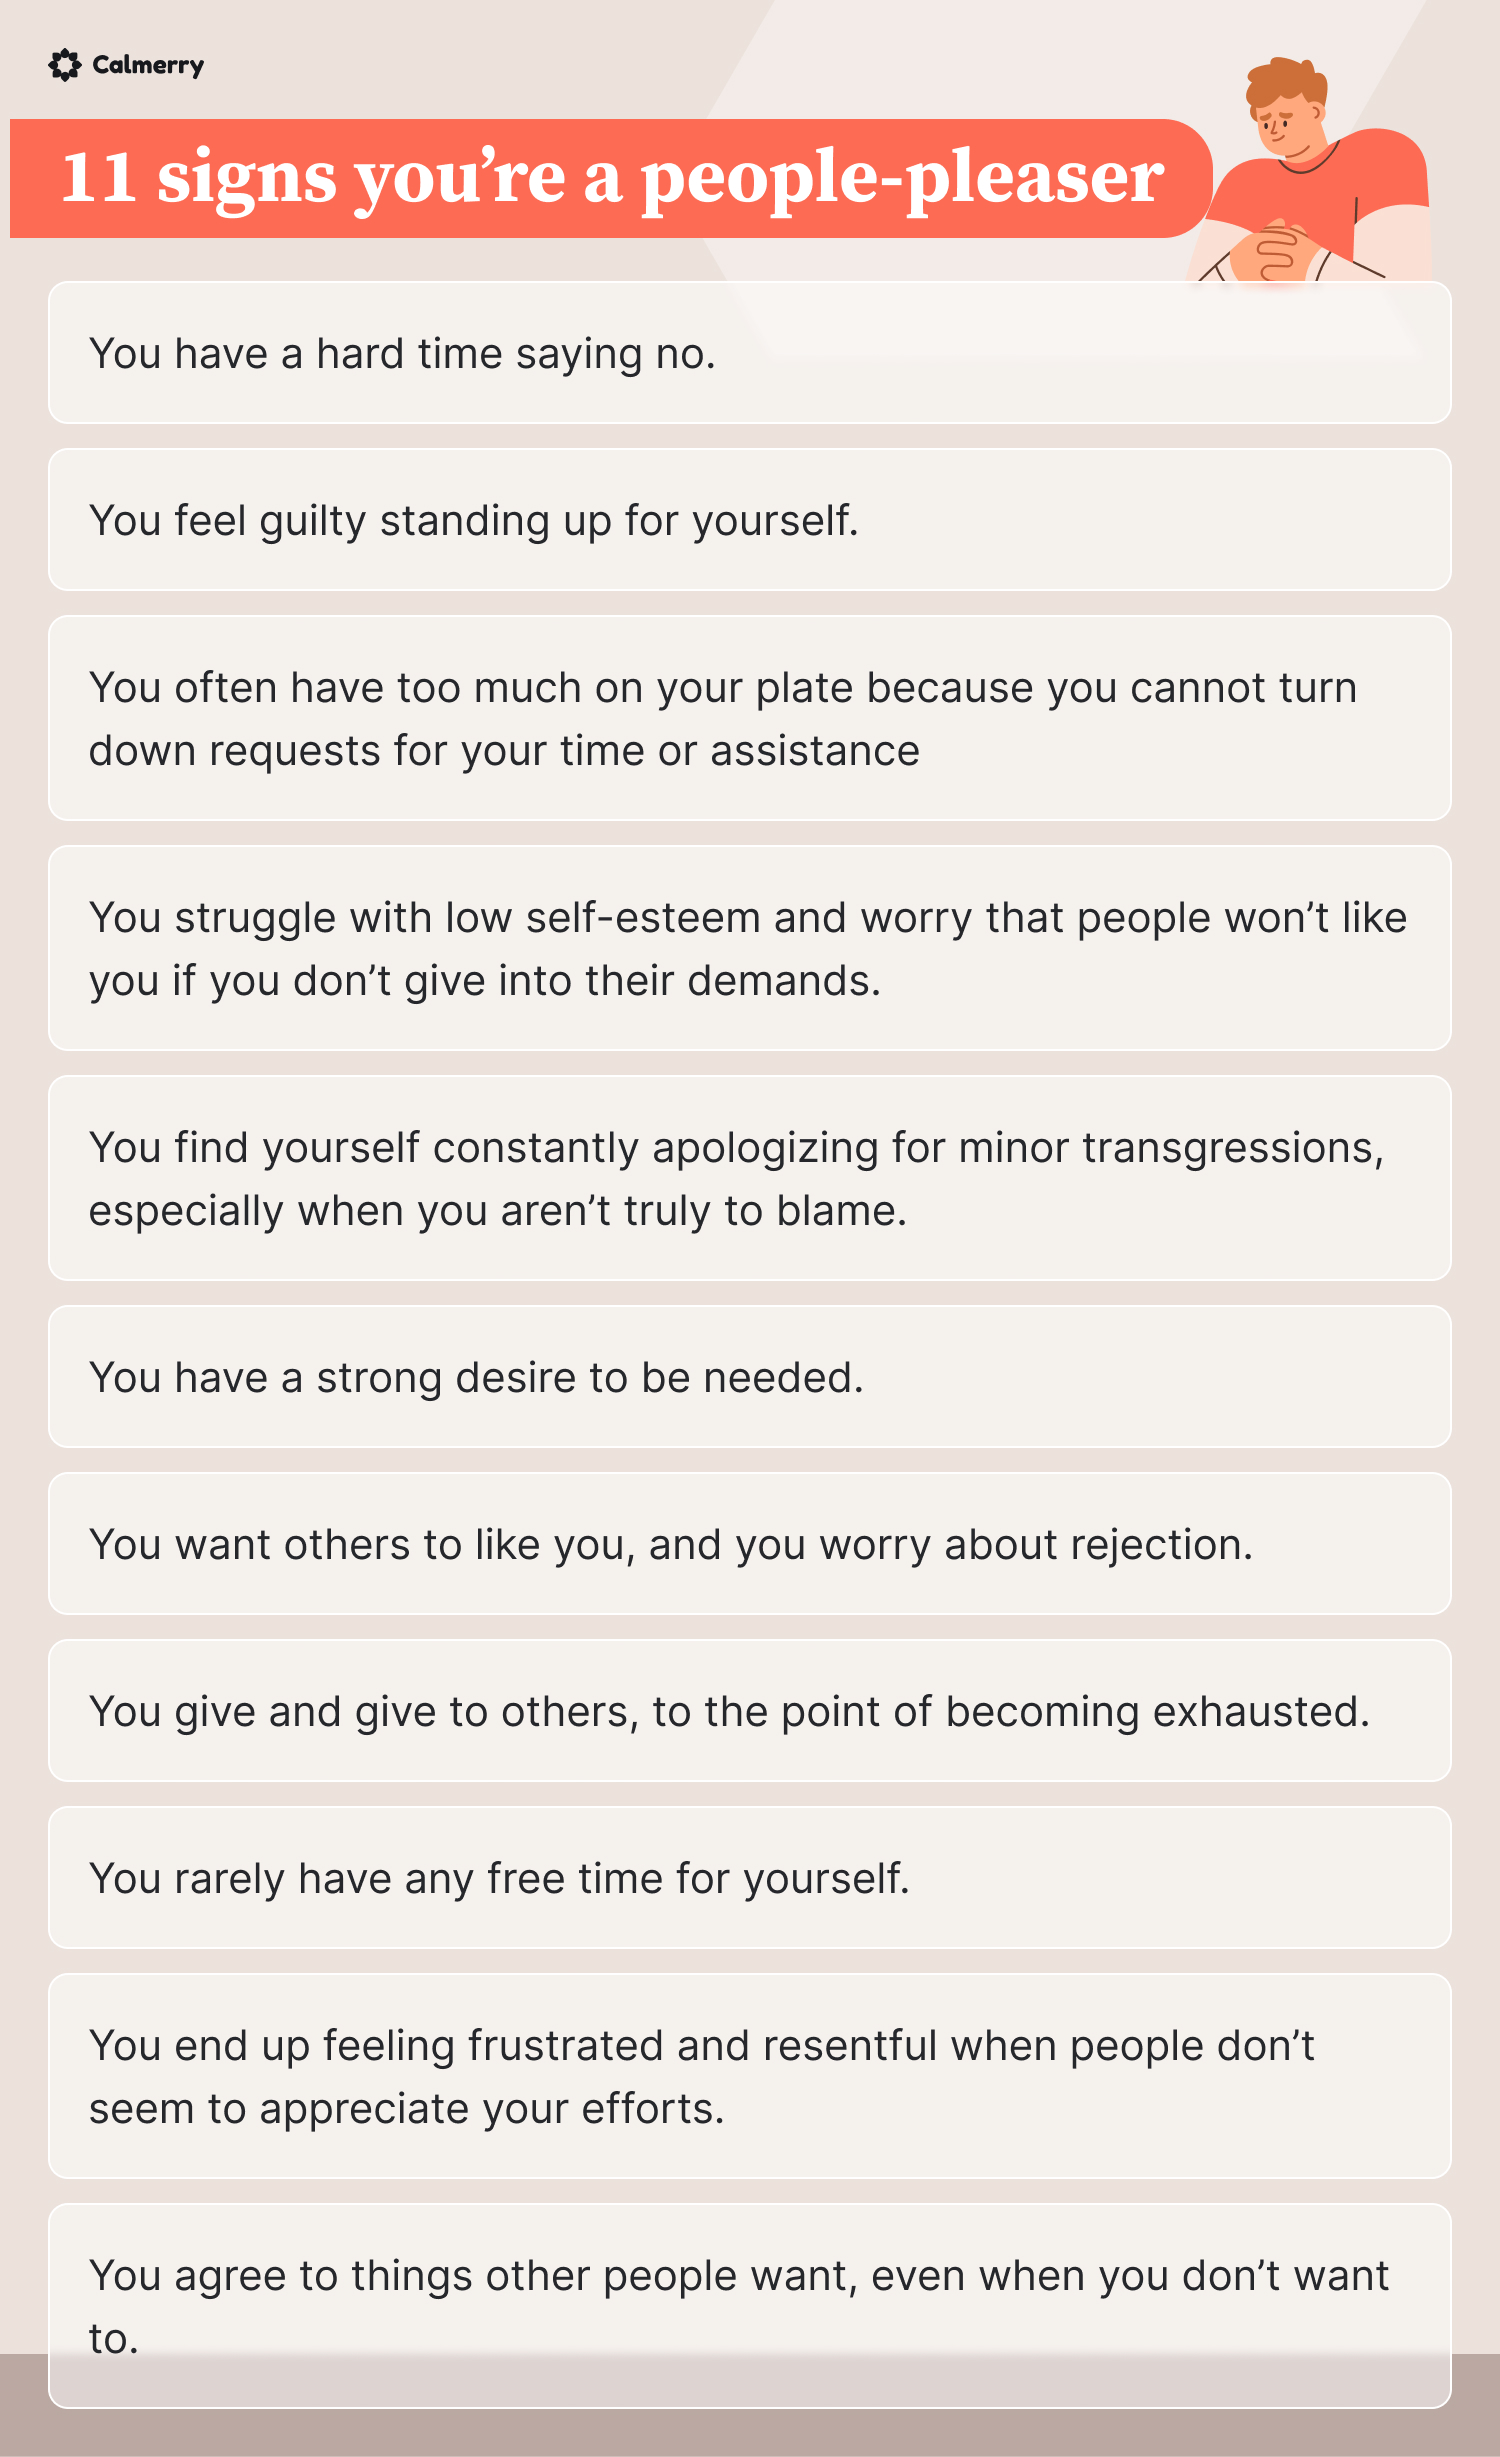 List of 11 signs you’re a people-pleaser with Calmerry branding. The signs include: 'You have a hard time saying no,' 'You feel guilty standing up for yourself,' 'You often have too much on your plate because you cannot turn down requests for your time or assistance,' 'You struggle with low self-esteem and worry that people won’t like you if you don’t give in to their demands,' 'You find yourself constantly apologizing for minor transgressions, especially when you aren’t truly to blame,' 'You have a strong desire to be needed,' 'You want others to like you, and you worry about rejection,' 'You give and give to others, to the point of becoming exhausted,' 'You rarely have any free time for yourself,' 'You end up feeling frustrated and resentful when people don’t seem to appreciate your efforts,' and 'You agree to things other people want, even when you don’t want to.' The image features a small illustration of a person in the top right corner.